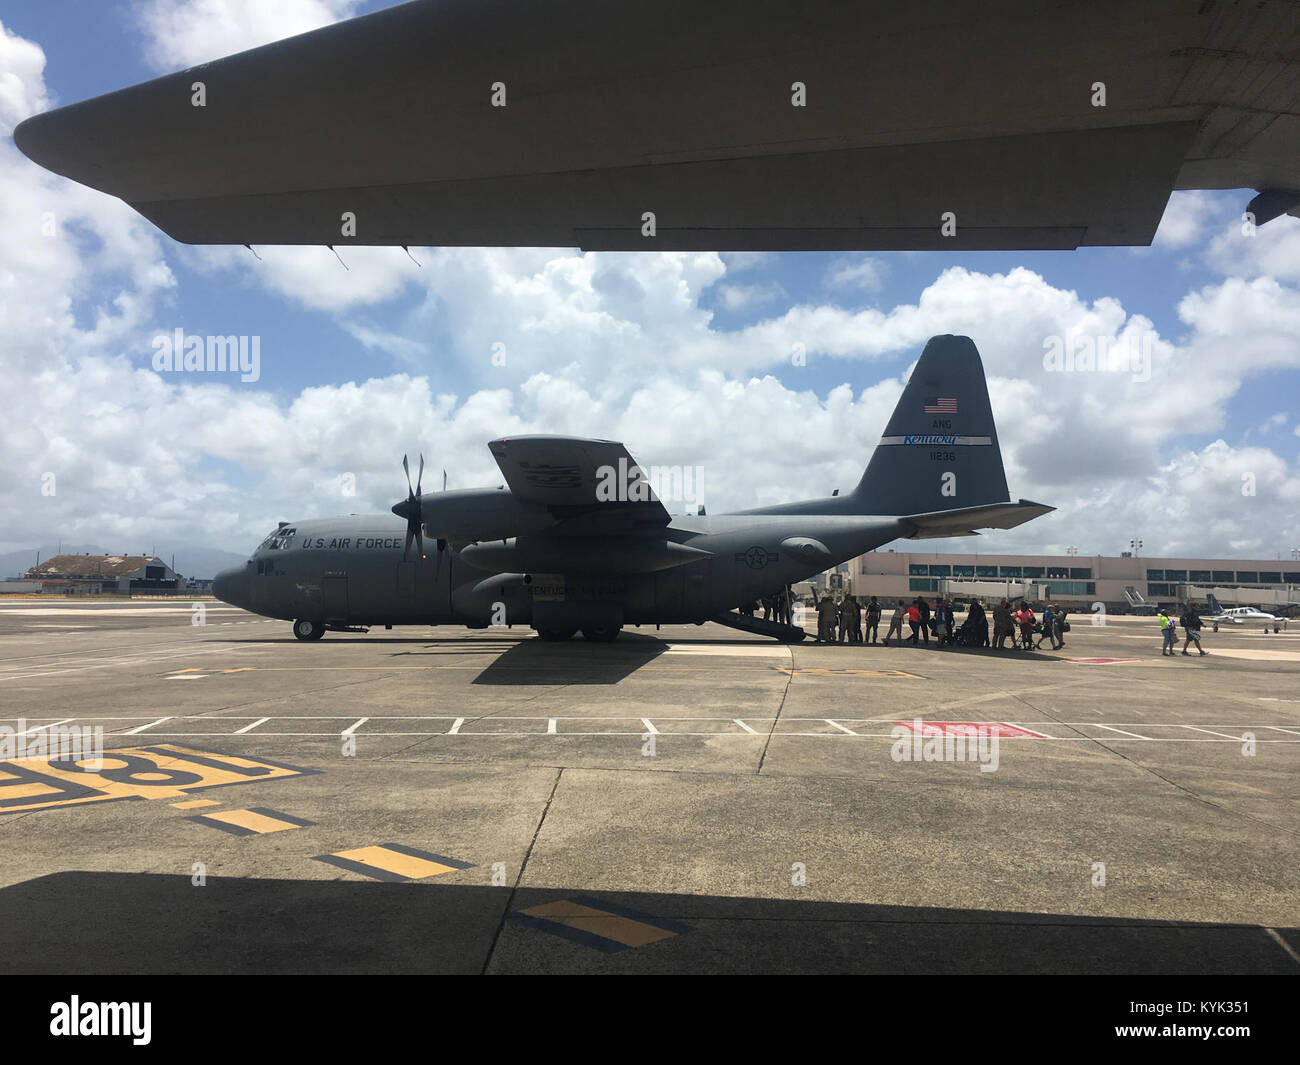 Twelve members of the Kentucky Air National Guard’s 123rd Airlift Wing and two of the unit’s C-130 aircraft helped evacuate more than 1,000 U.S. citizens from the Dutch Caribbean island of St. Maarten Sept. 9-10, 2017, flying them to safety in Puerto Rico in the wake of Hurricane Irma. The Kentucky Airmen, who personally evacuated more than 400 people, were part of a team that included aircraft and Airmen from the New York Air Guard’s 106th Rescue Wing and the Puerto Rico Air Guard’s 156th Airlift Wing. (U.S. Air National Guard photo) Stock Photo